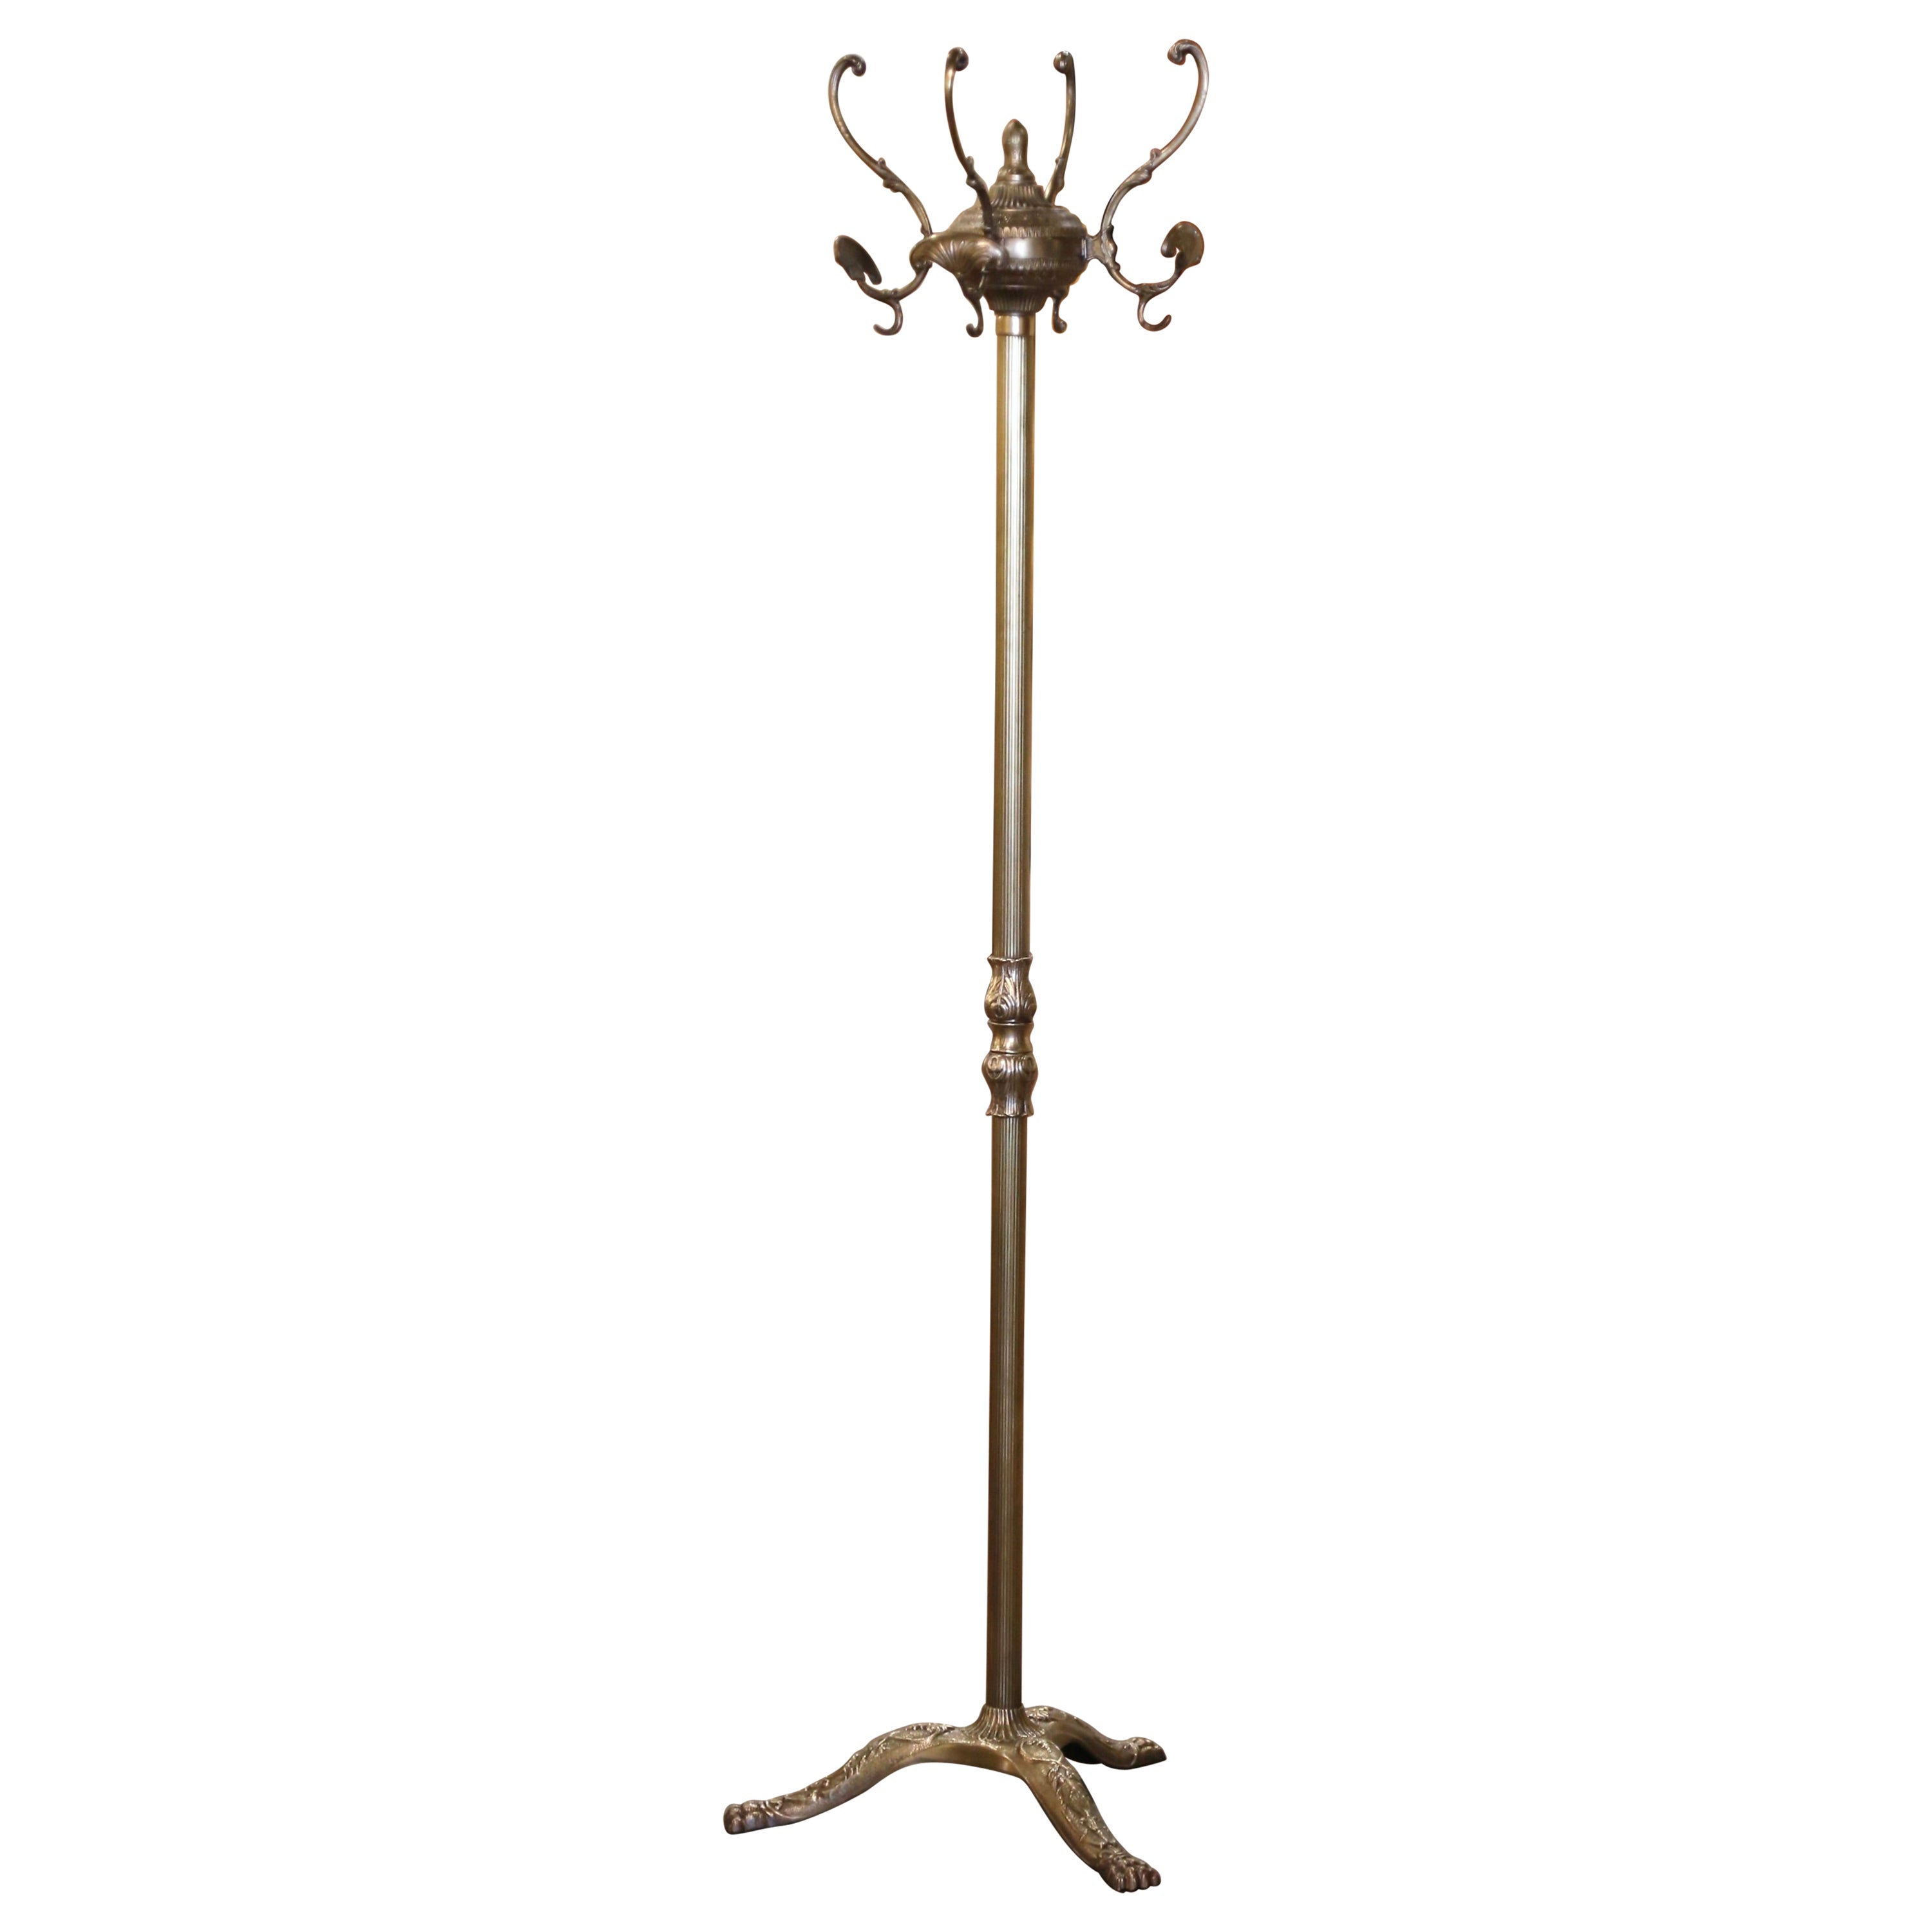 Early 20th Century French Gilt Brass Swivel Four-Hook Standing Hall Tree